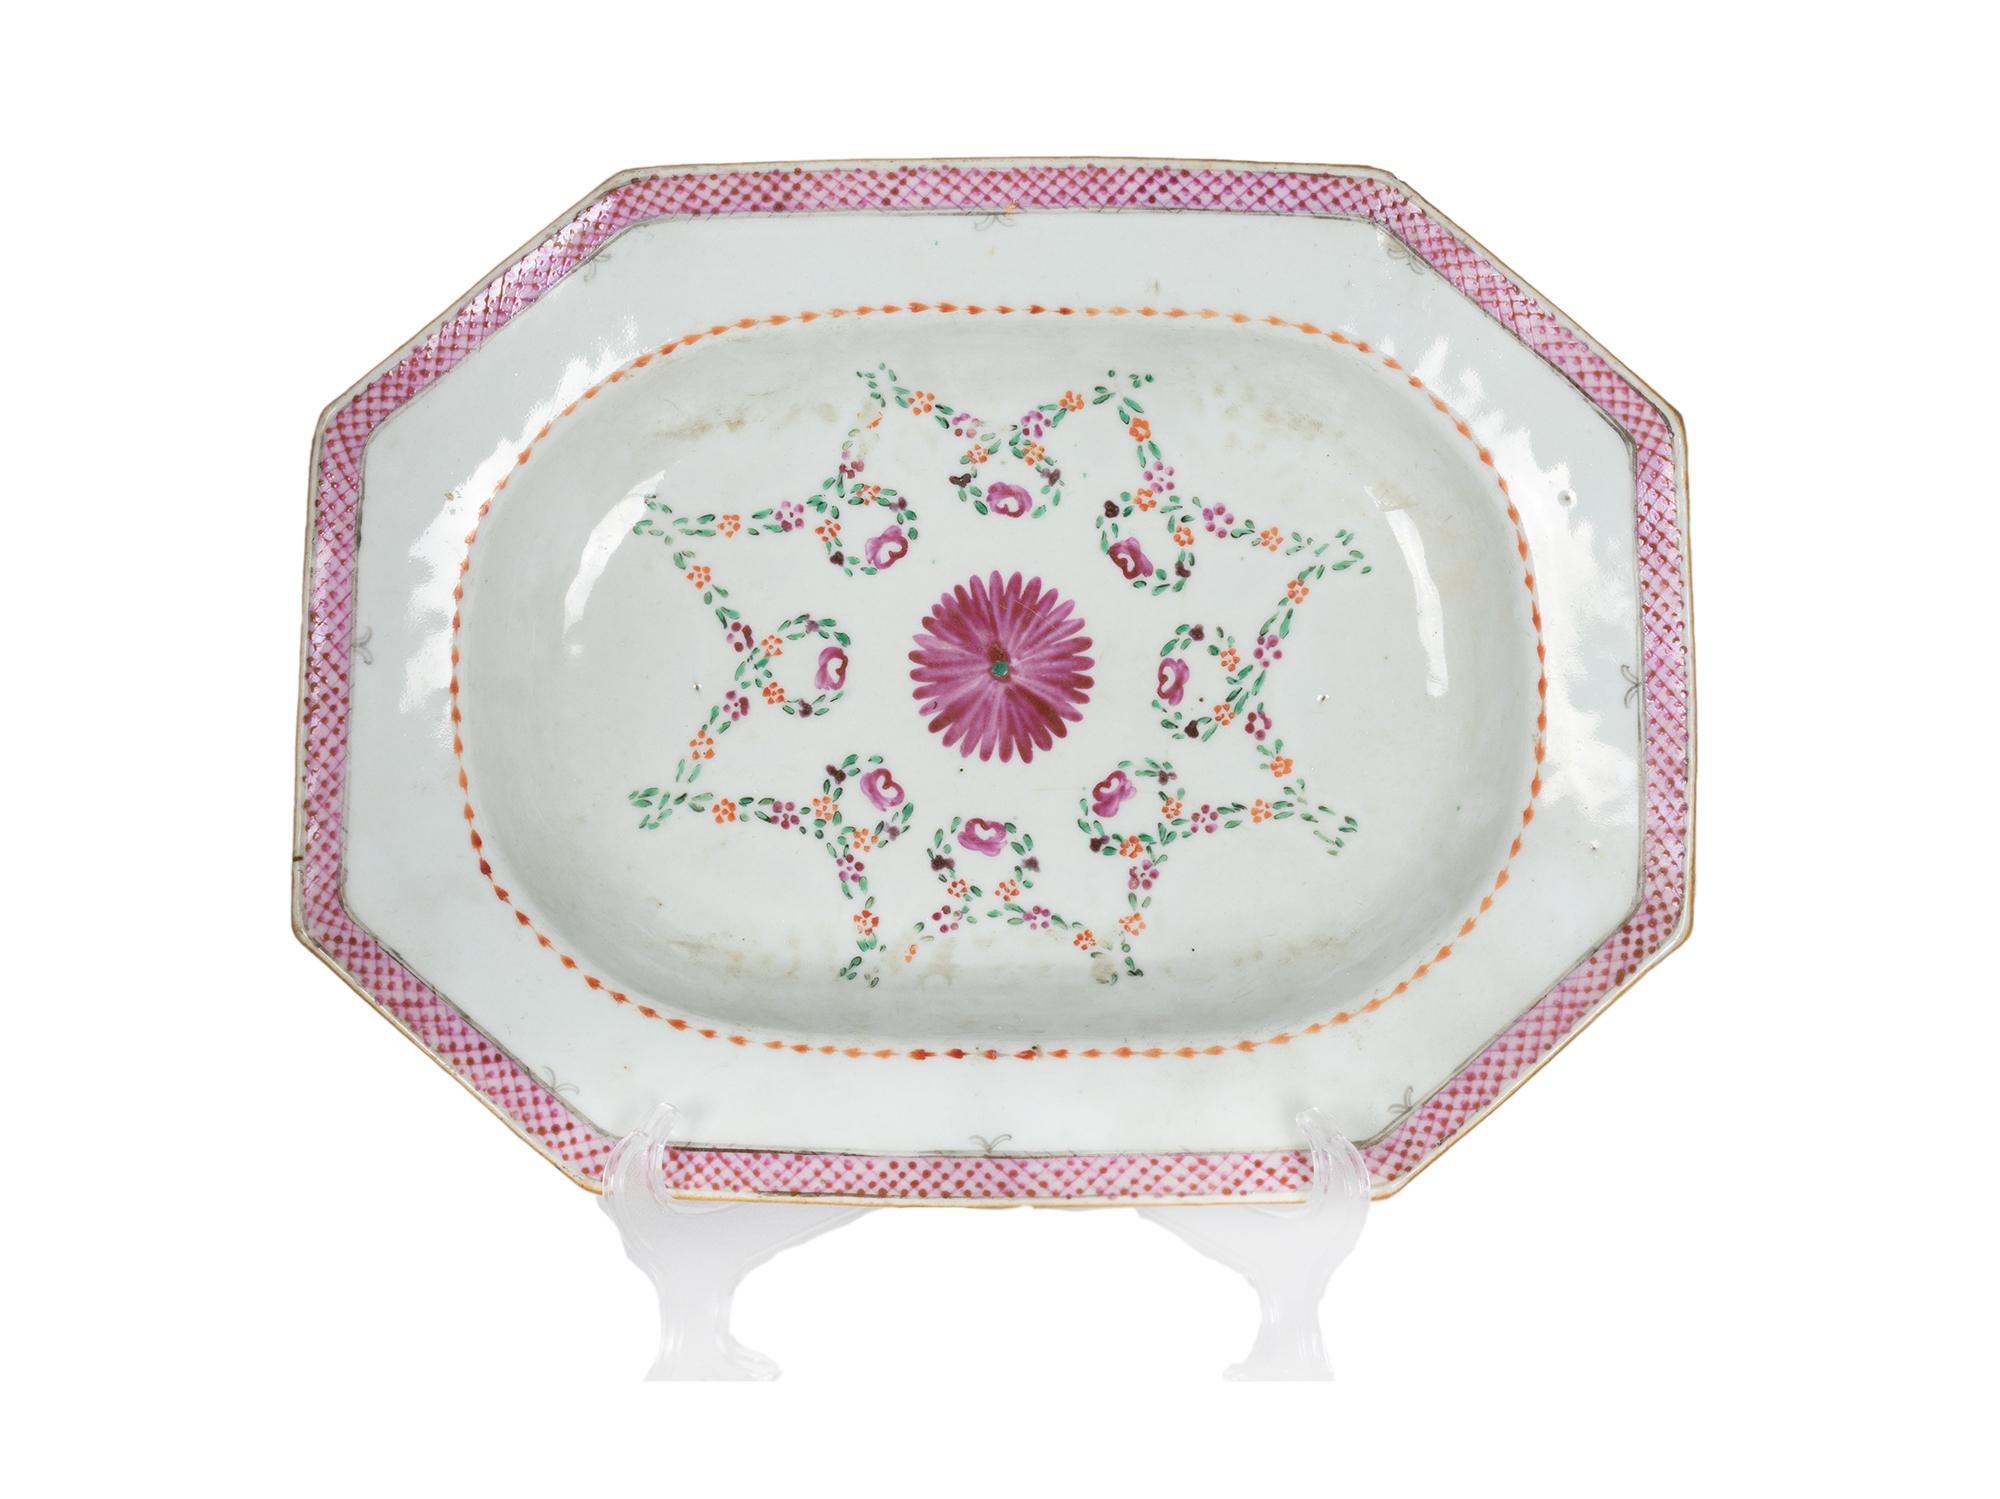 Chinese Tureen & Platter Rose Porcelain By Portuguese India Company, 18th Century For Sale